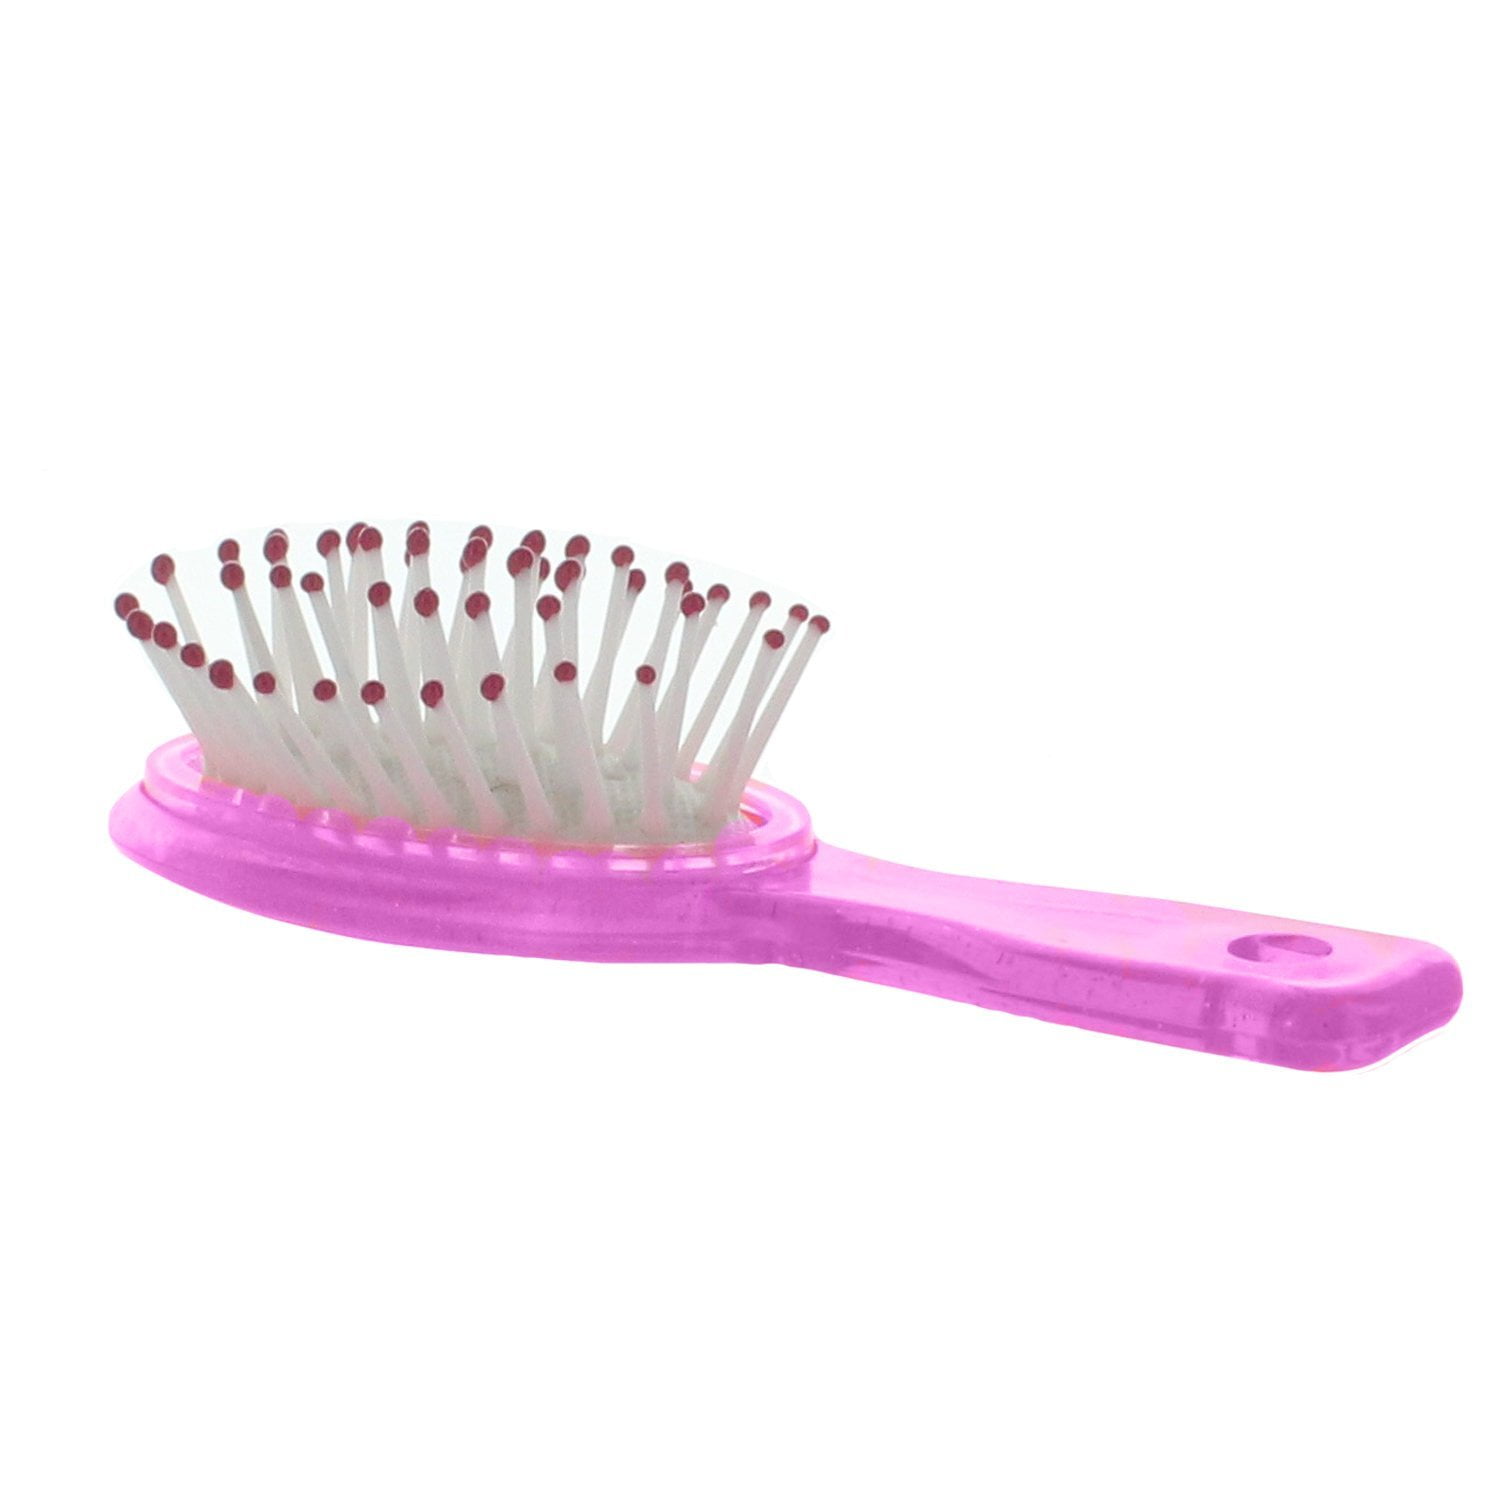 Doll Clothes - Hairbrush Accessories Fits American Girl & Other 18 Inch  Dolls 